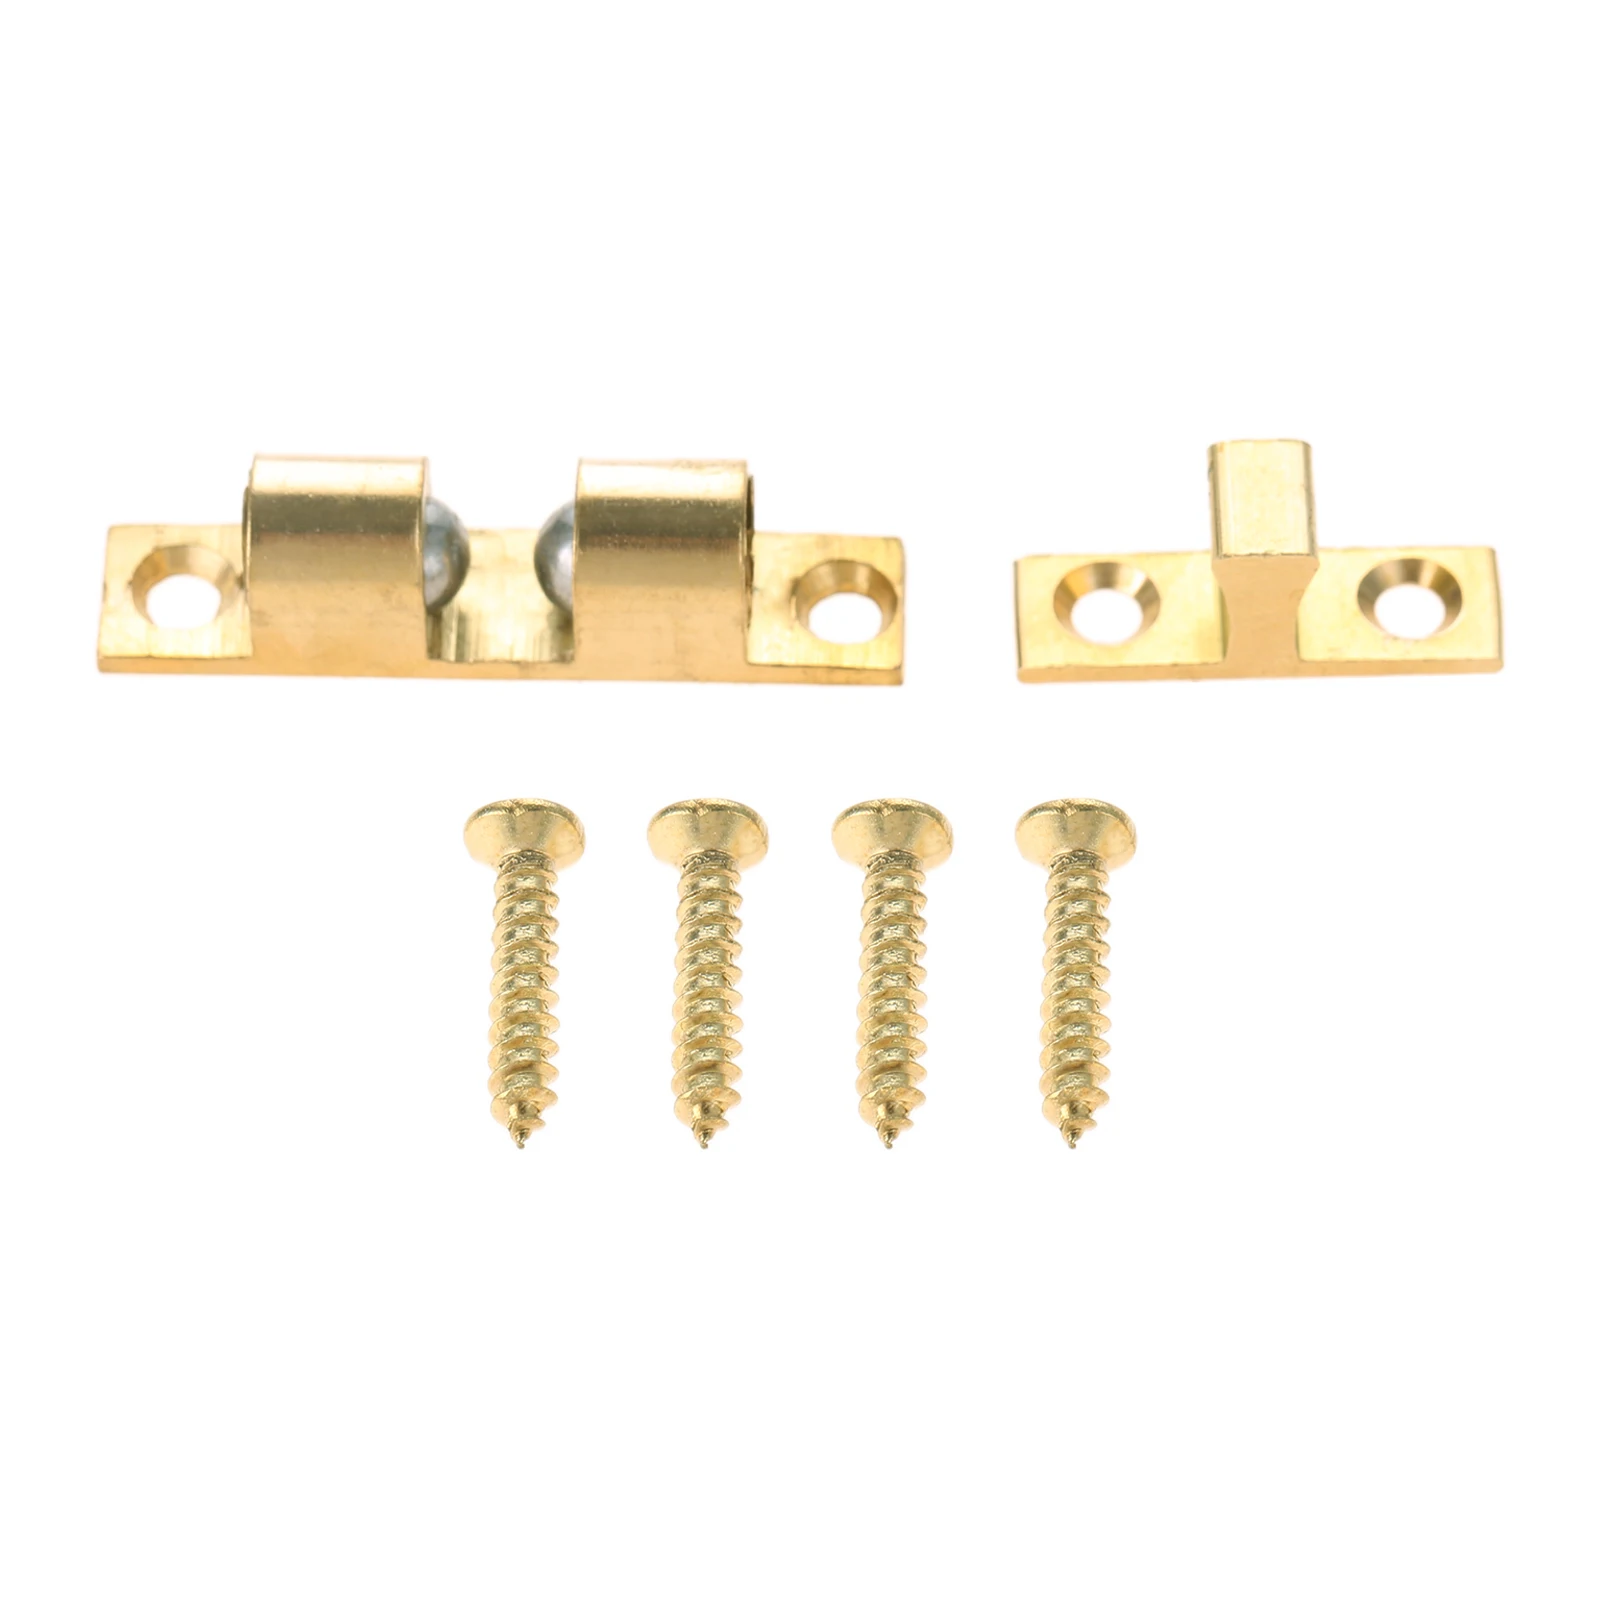 

1pc 35mm Brass Double Spring Ball Catch for Furniture Cupboard Cabinet Door Adjustable Closet Latch with Screws